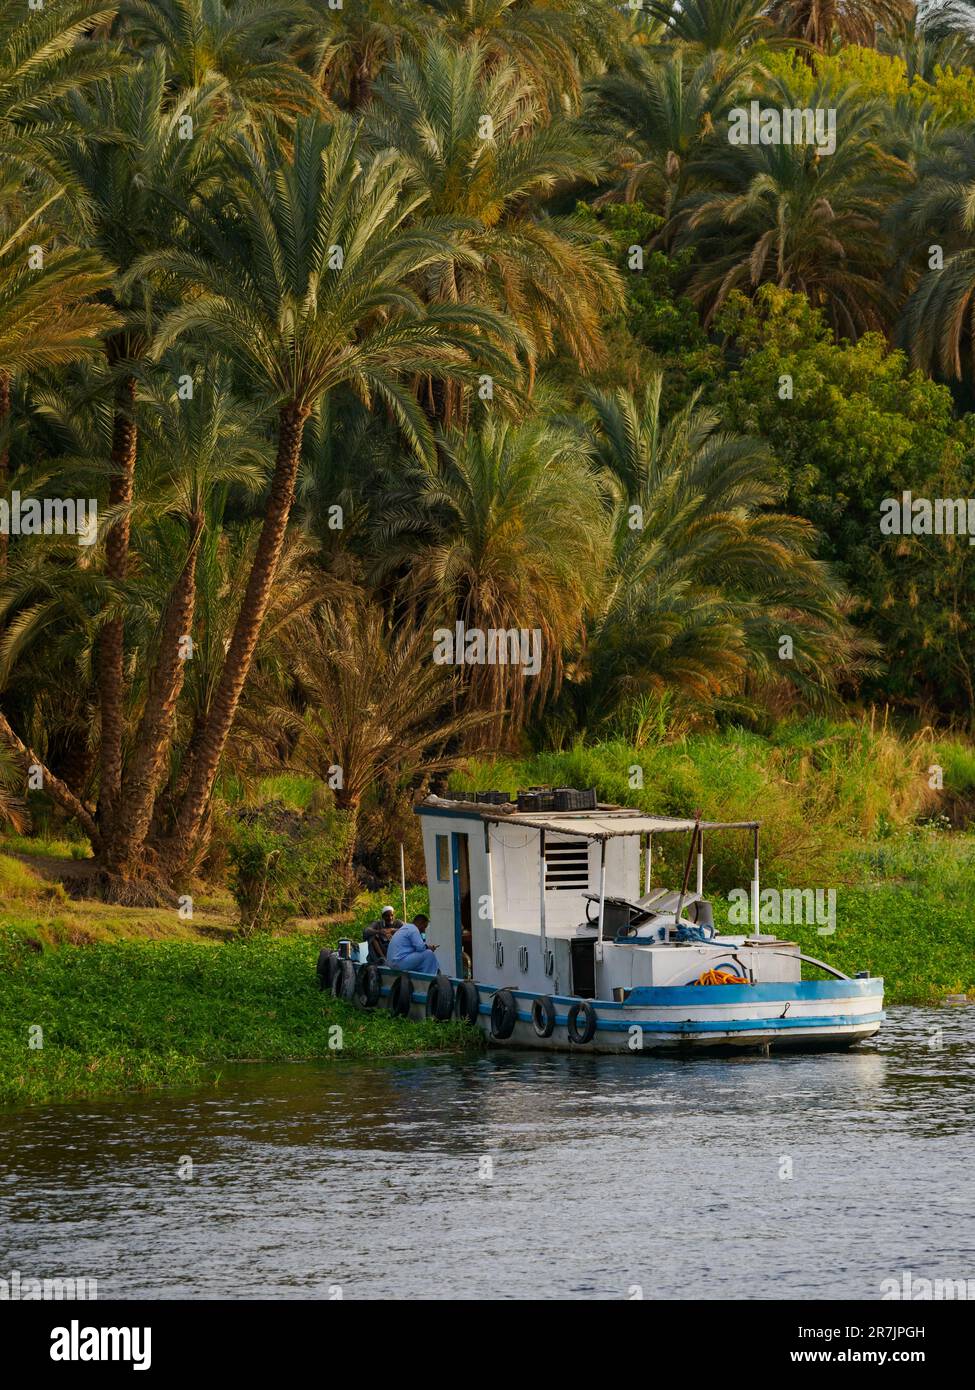 Transportation Workers Take a Break by the Tropical River Stock Photo